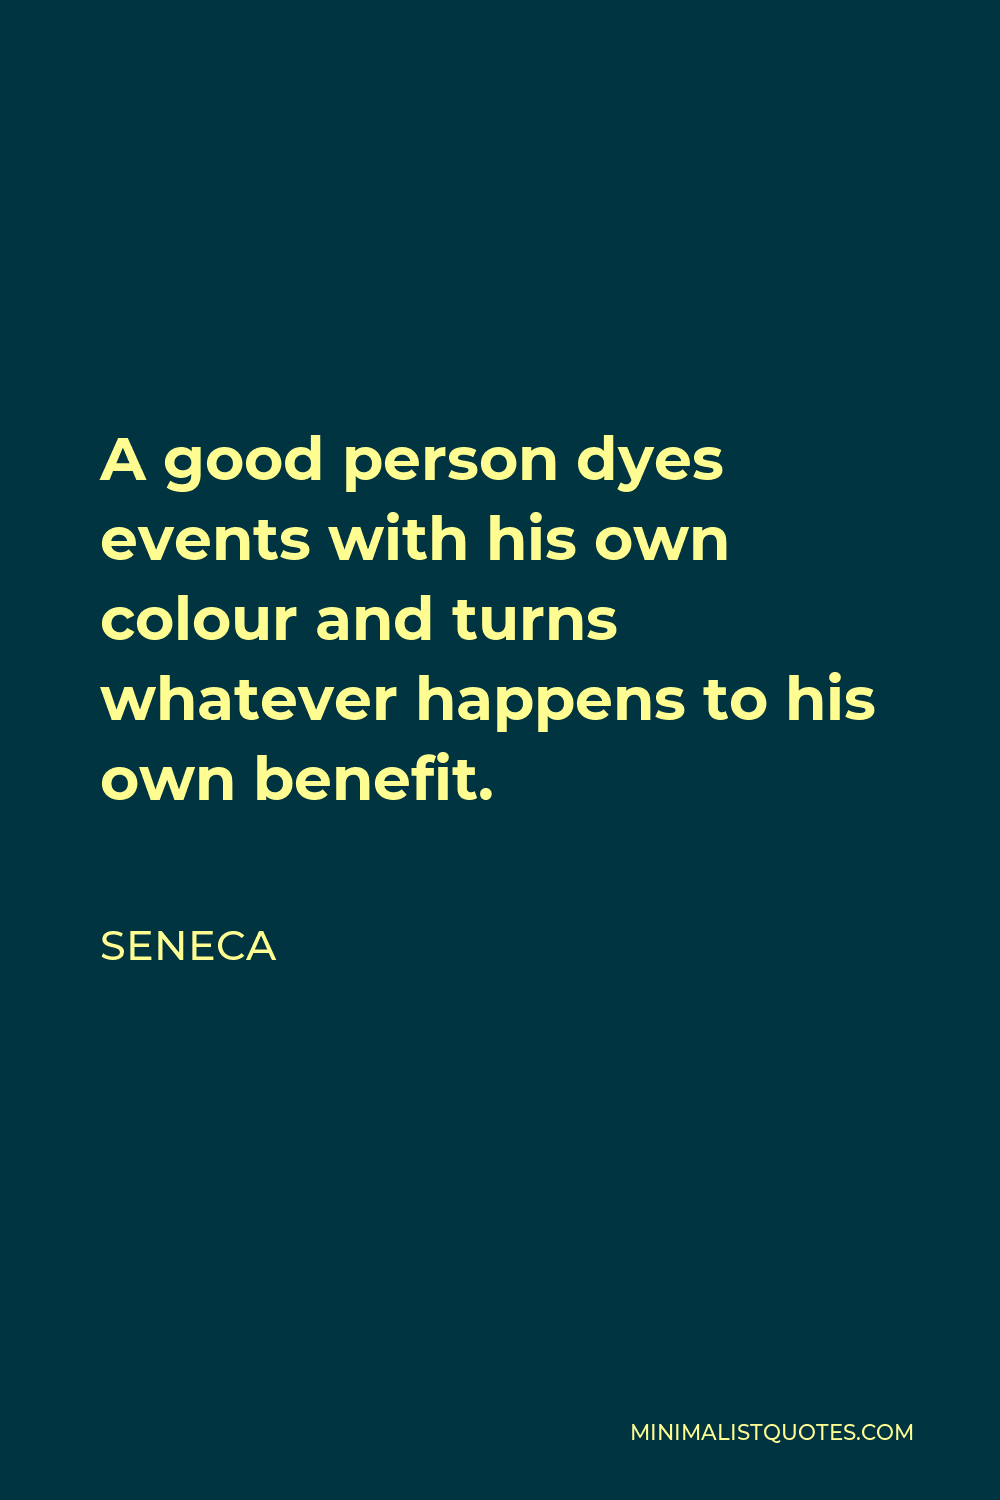 Seneca Quote - A good person dyes events with his own colour and turns whatever happens to his own benefit.